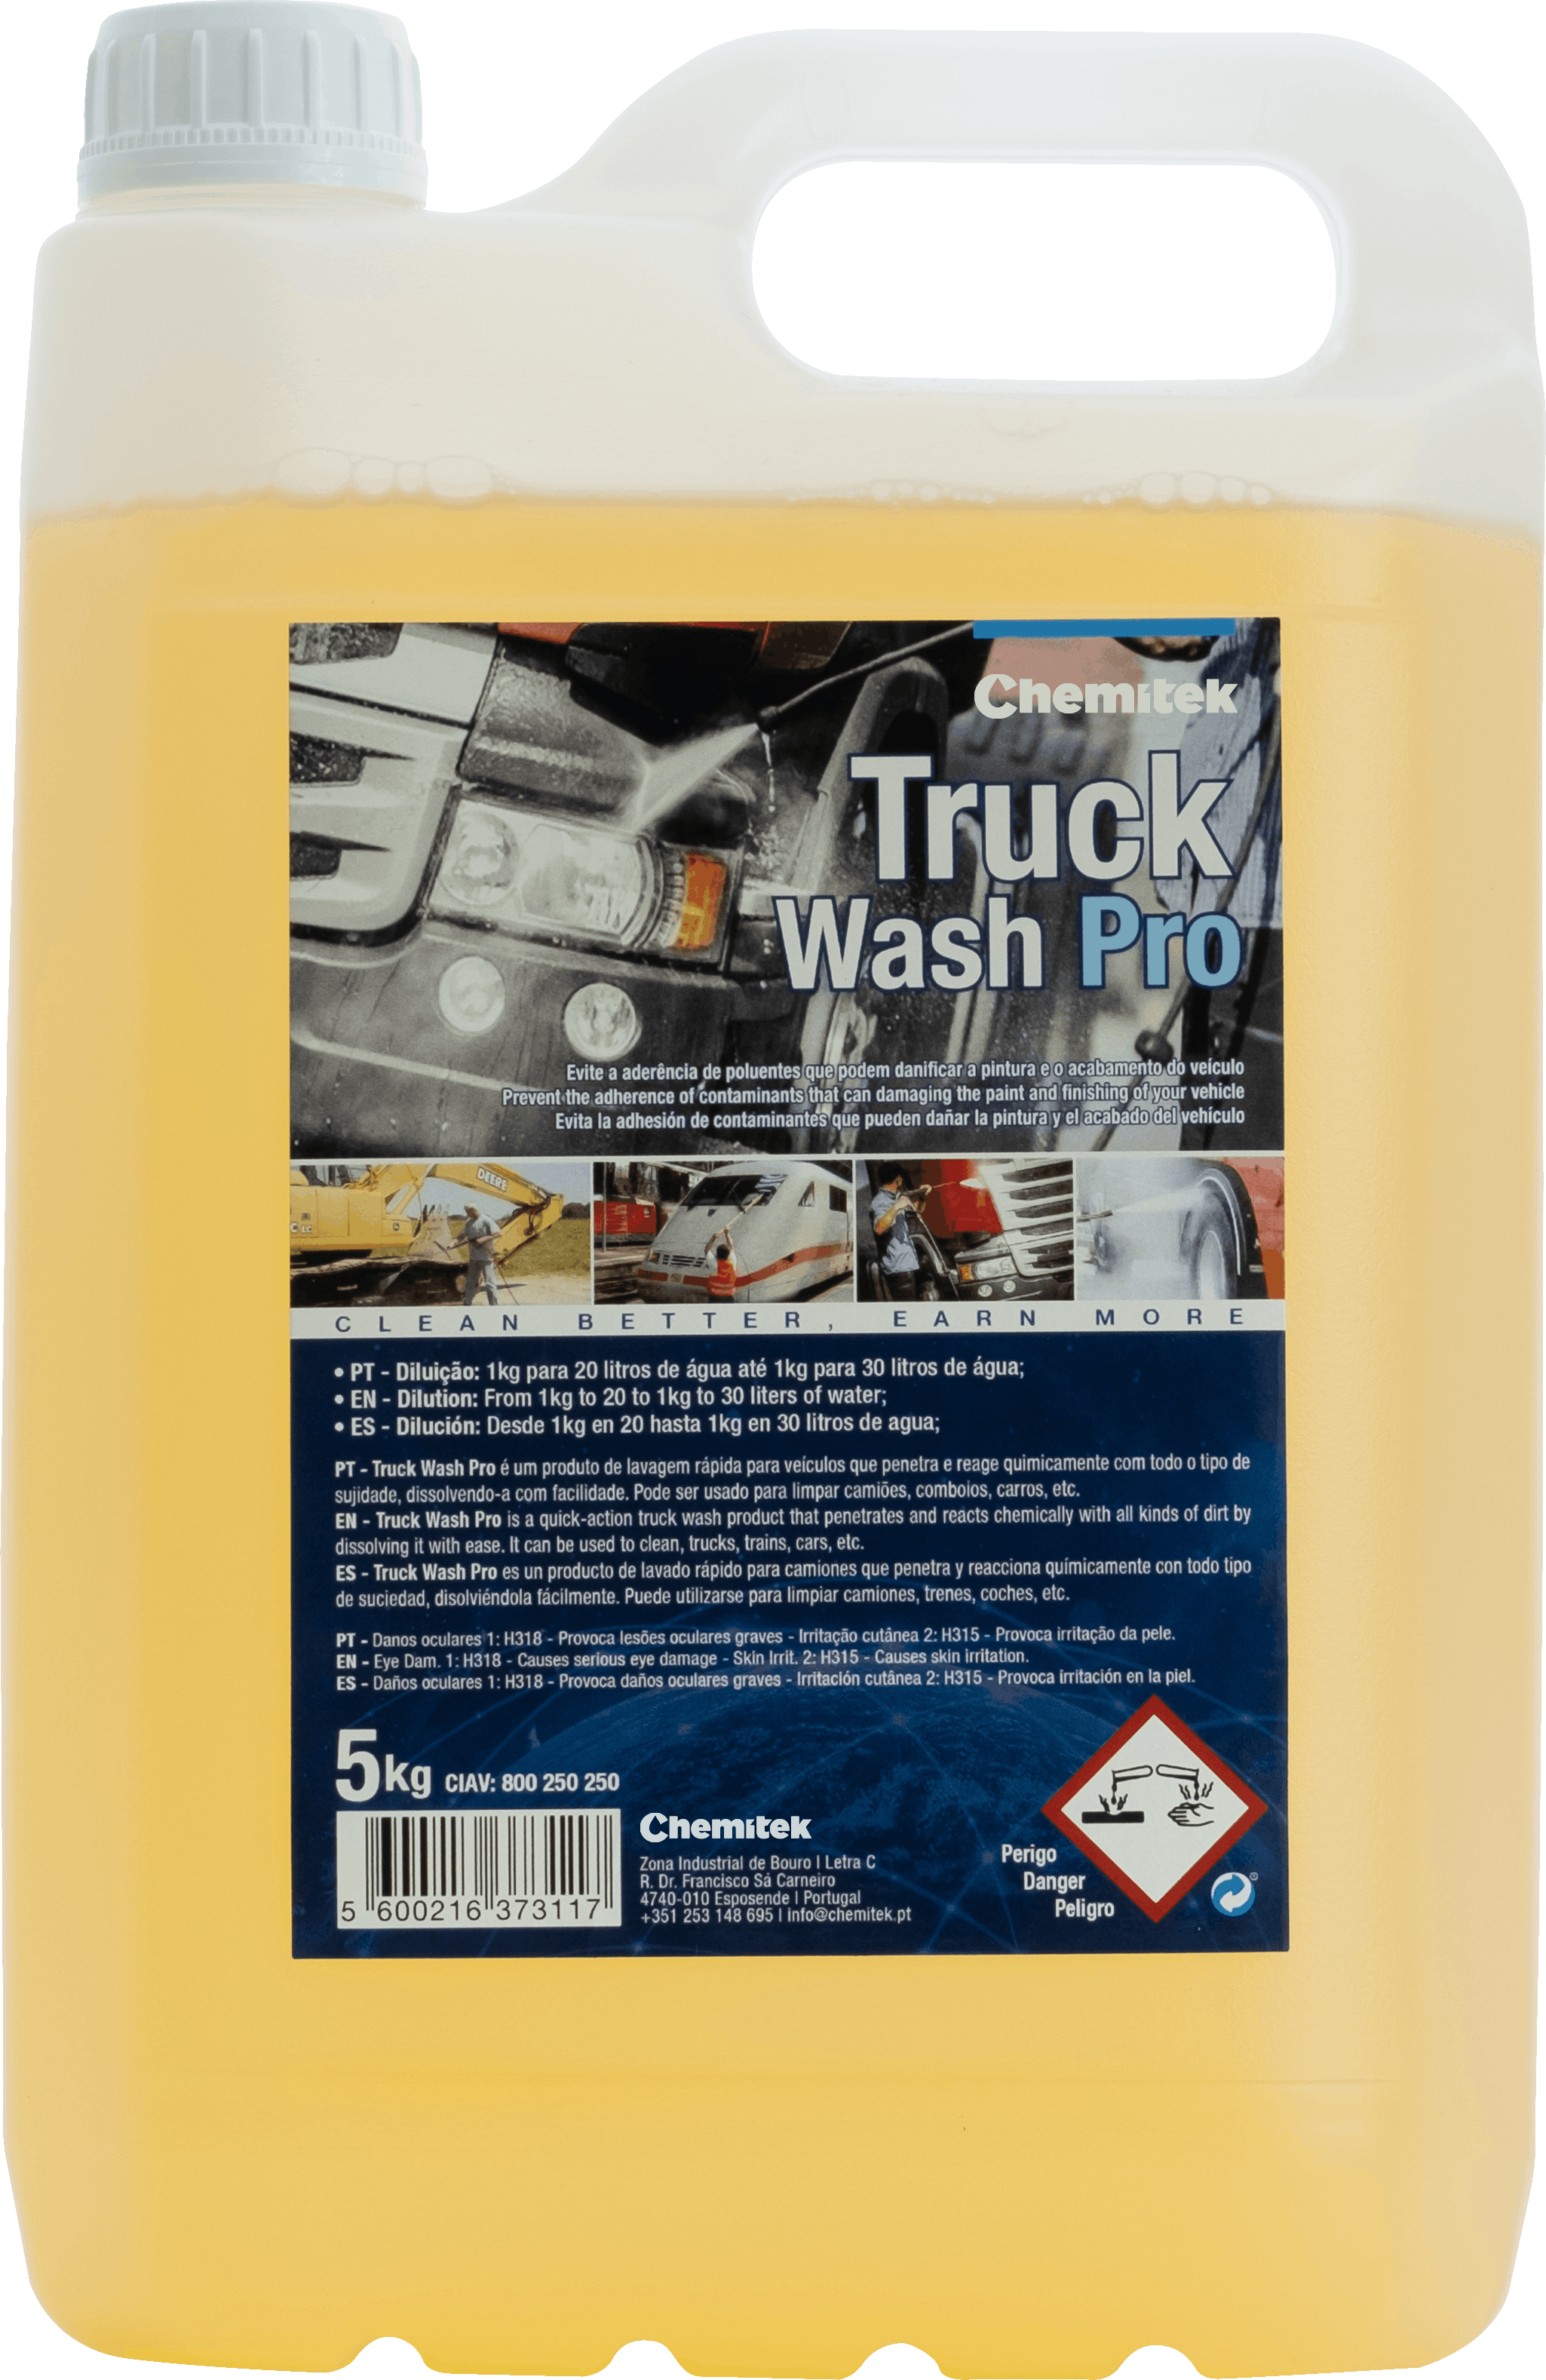 Product - Truck Wash Pro